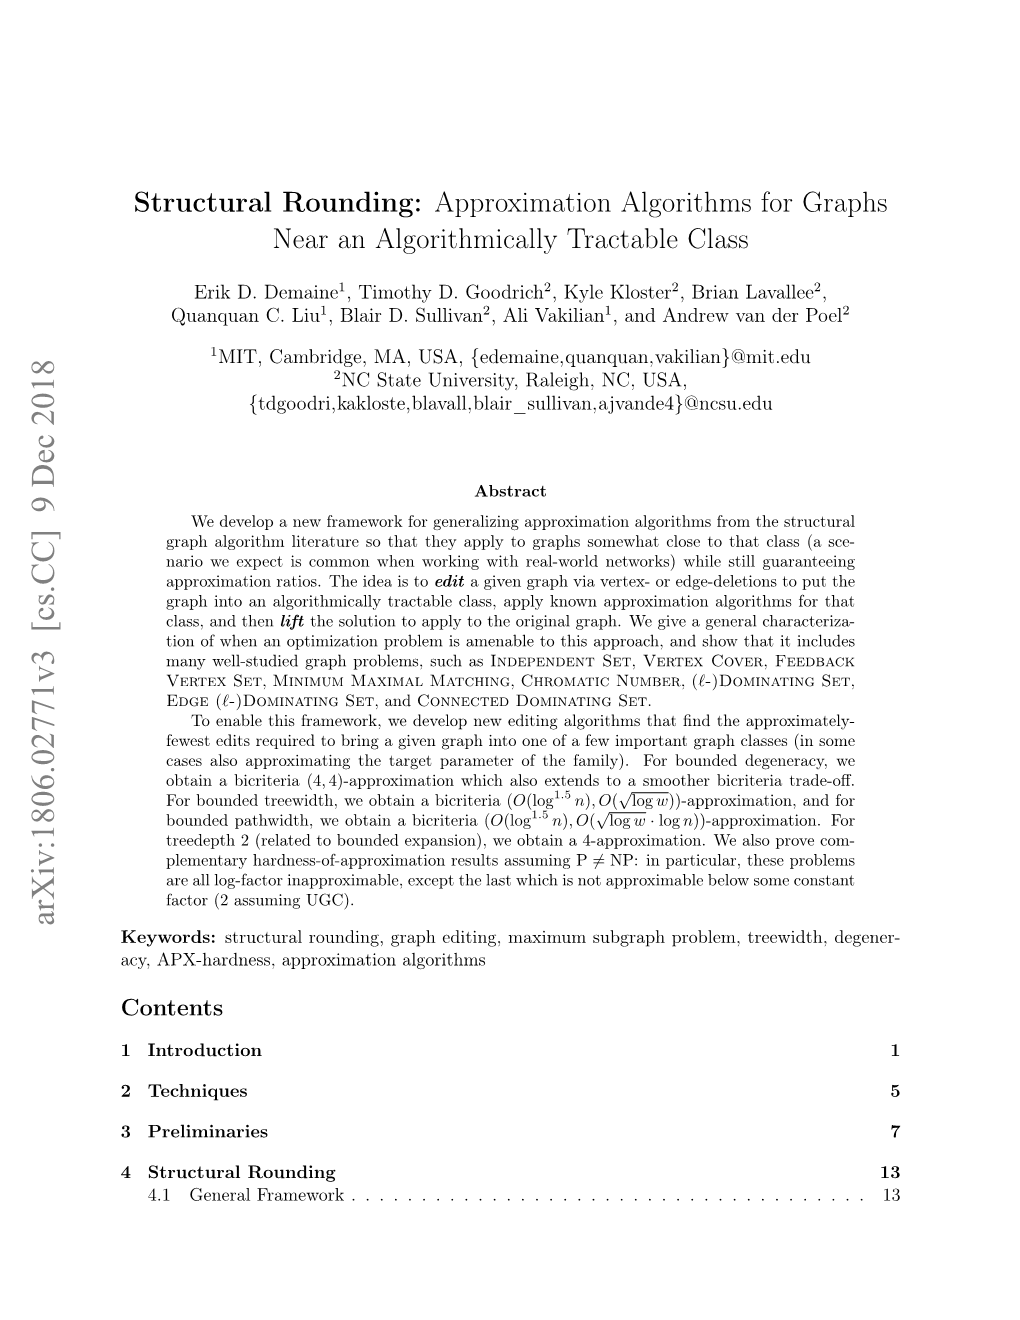 Structural Rounding: Approximation Algorithms for Graphs Near an Algorithmically Tractable Class